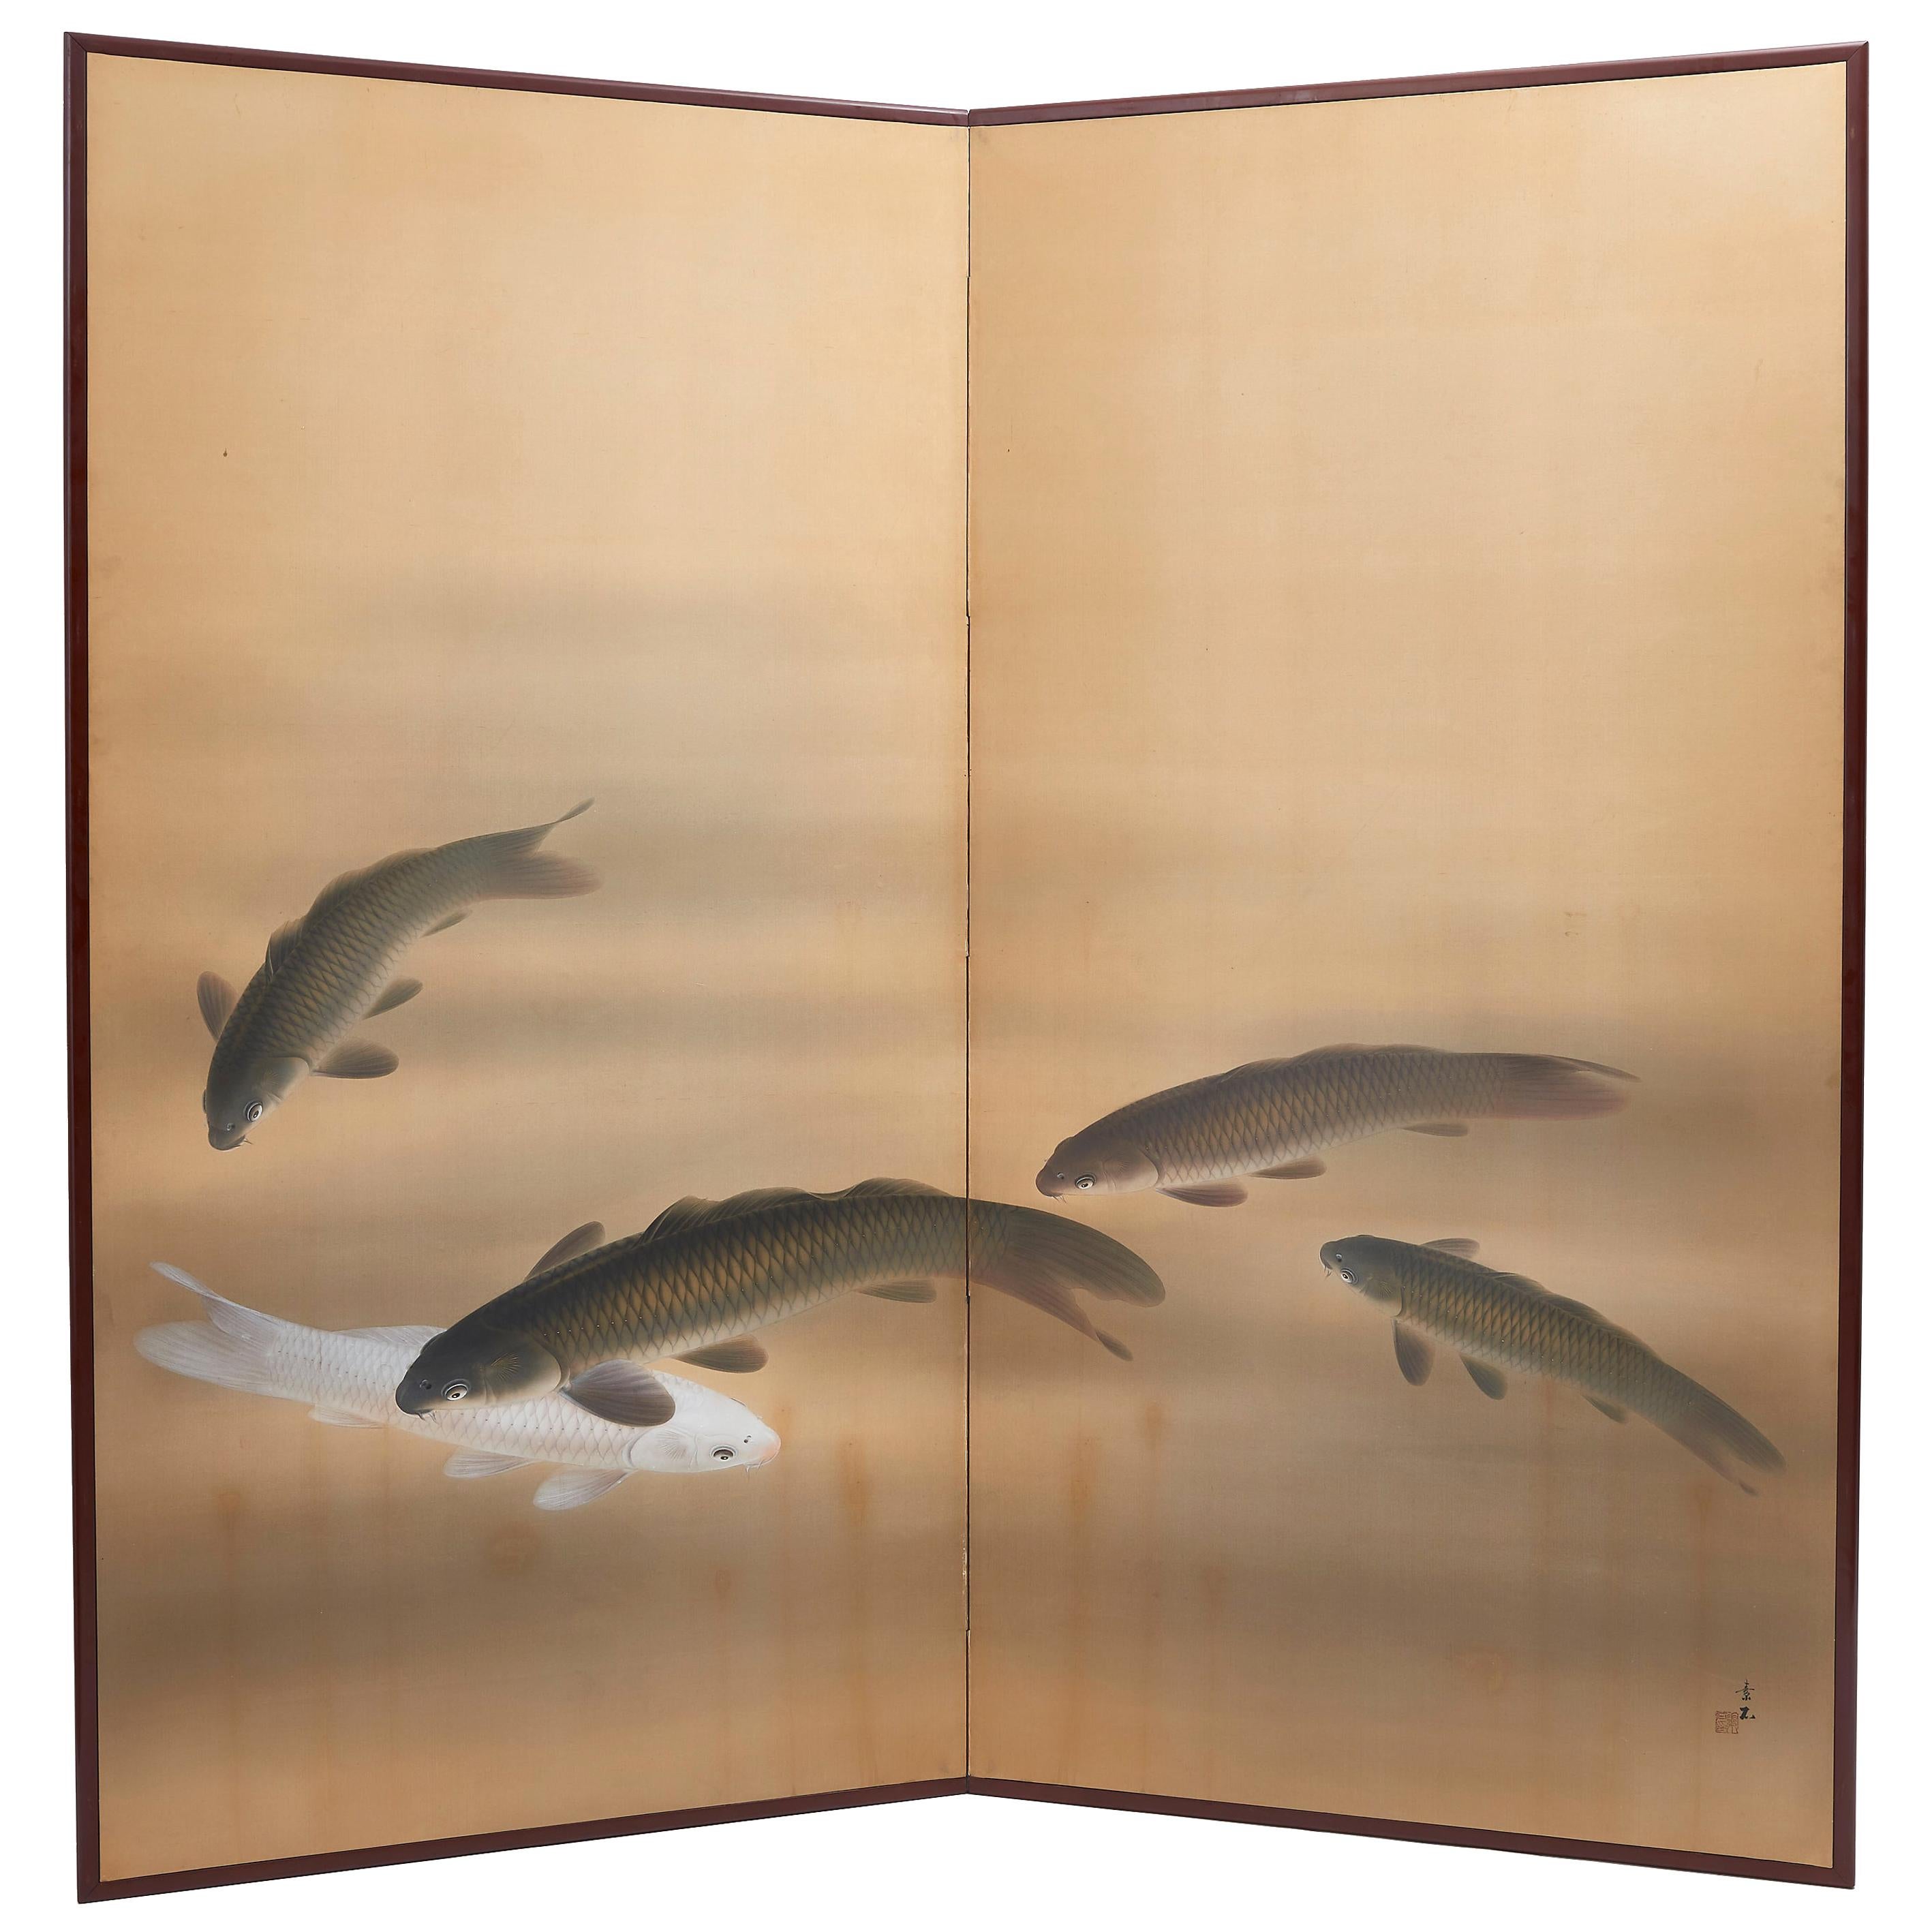 Two-Fold Japanese Screen of Koi Carps on Pale Ground, Early 20th Century